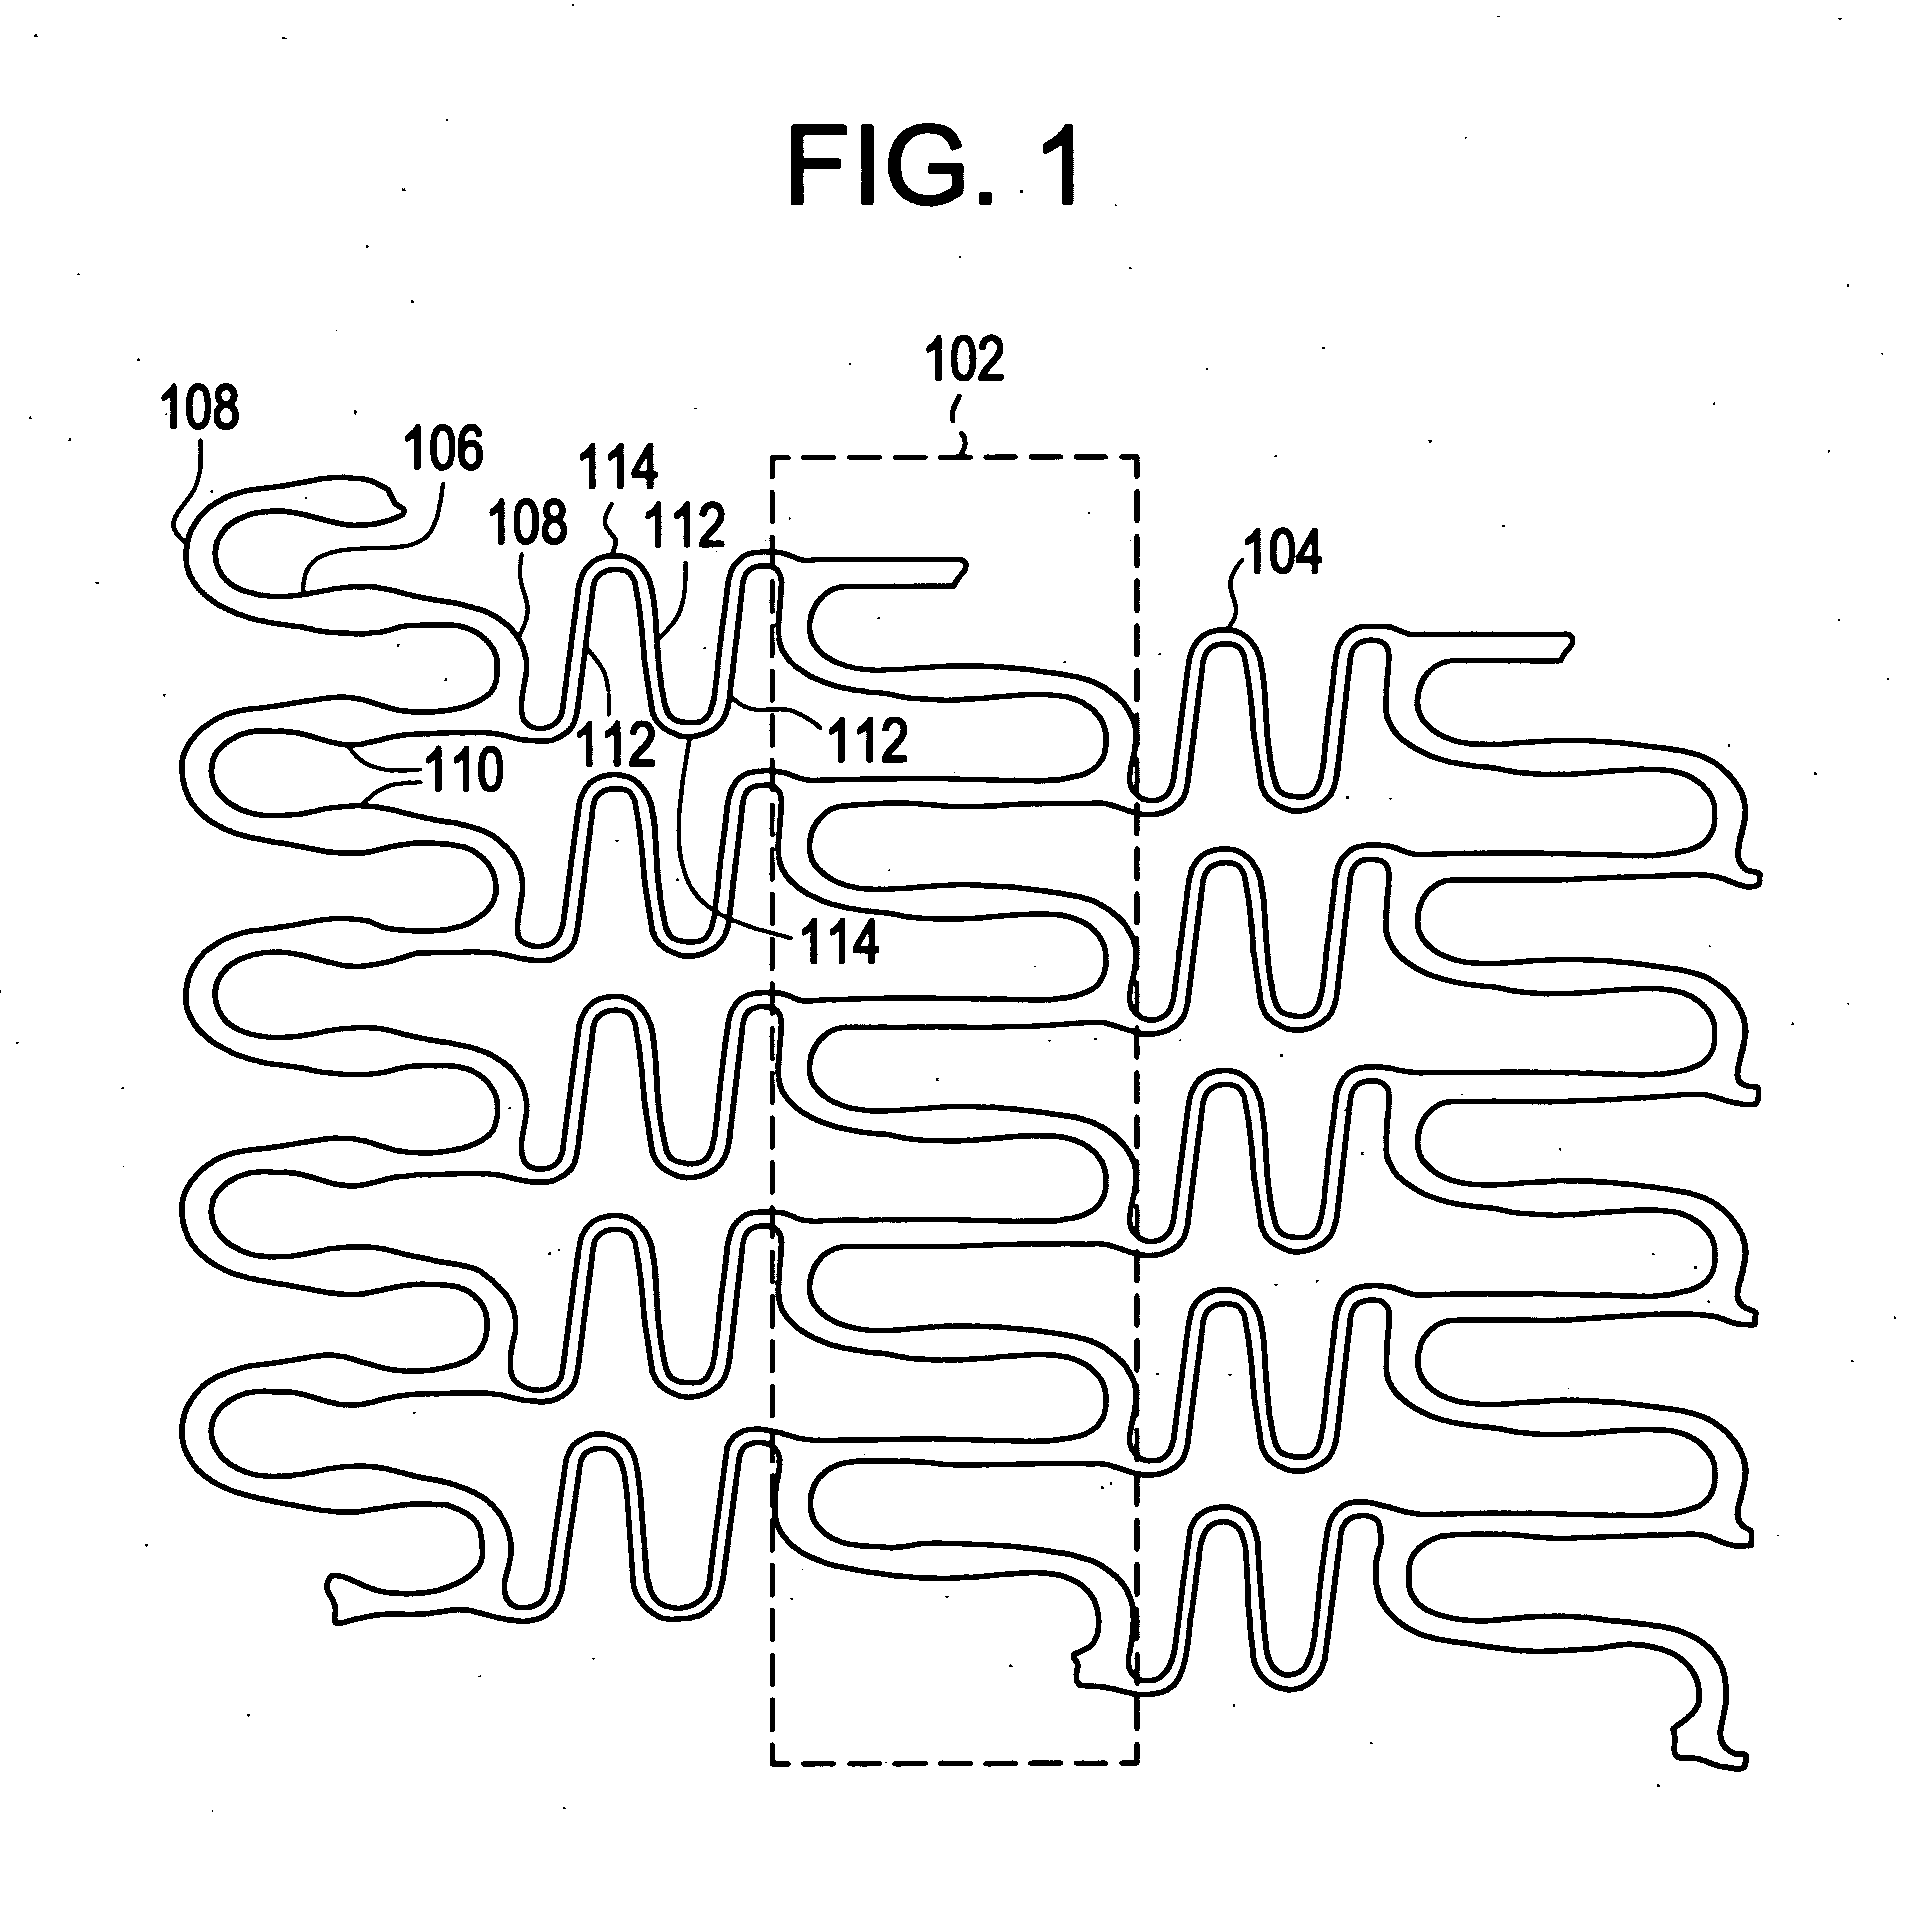 Implantable device formed from polymer and plasticizer blends having modified molecular structures